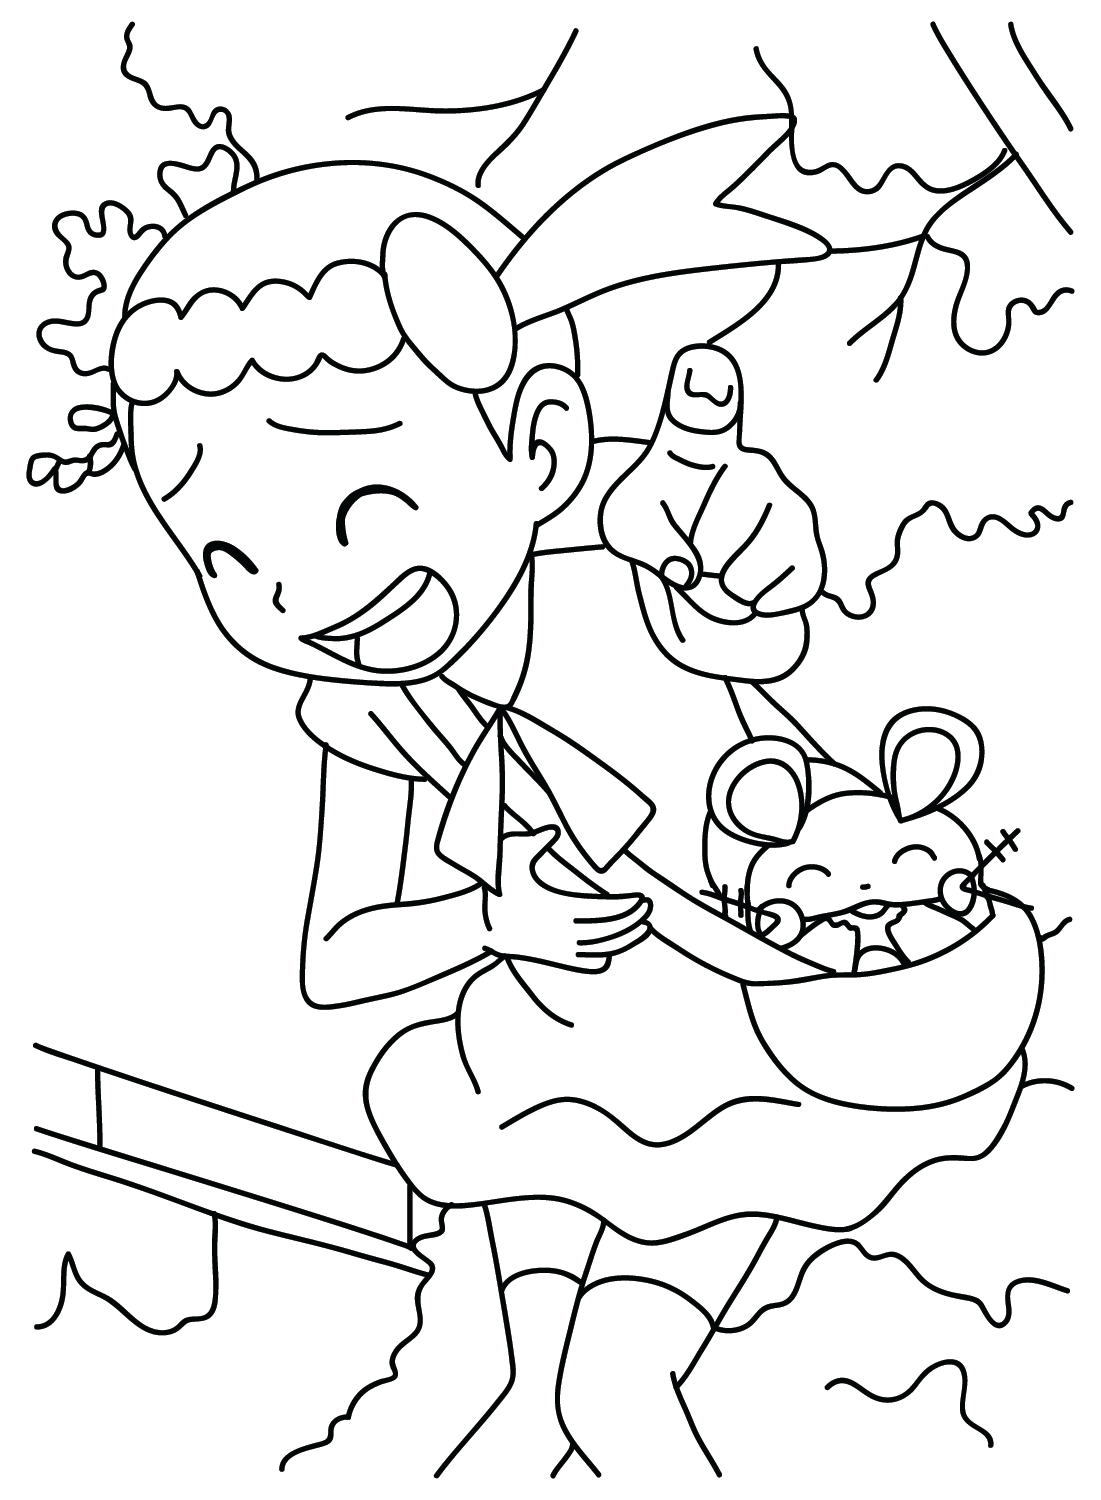 Bonnie Pokemon Coloring Pages to Download from Bonnie Pokemon